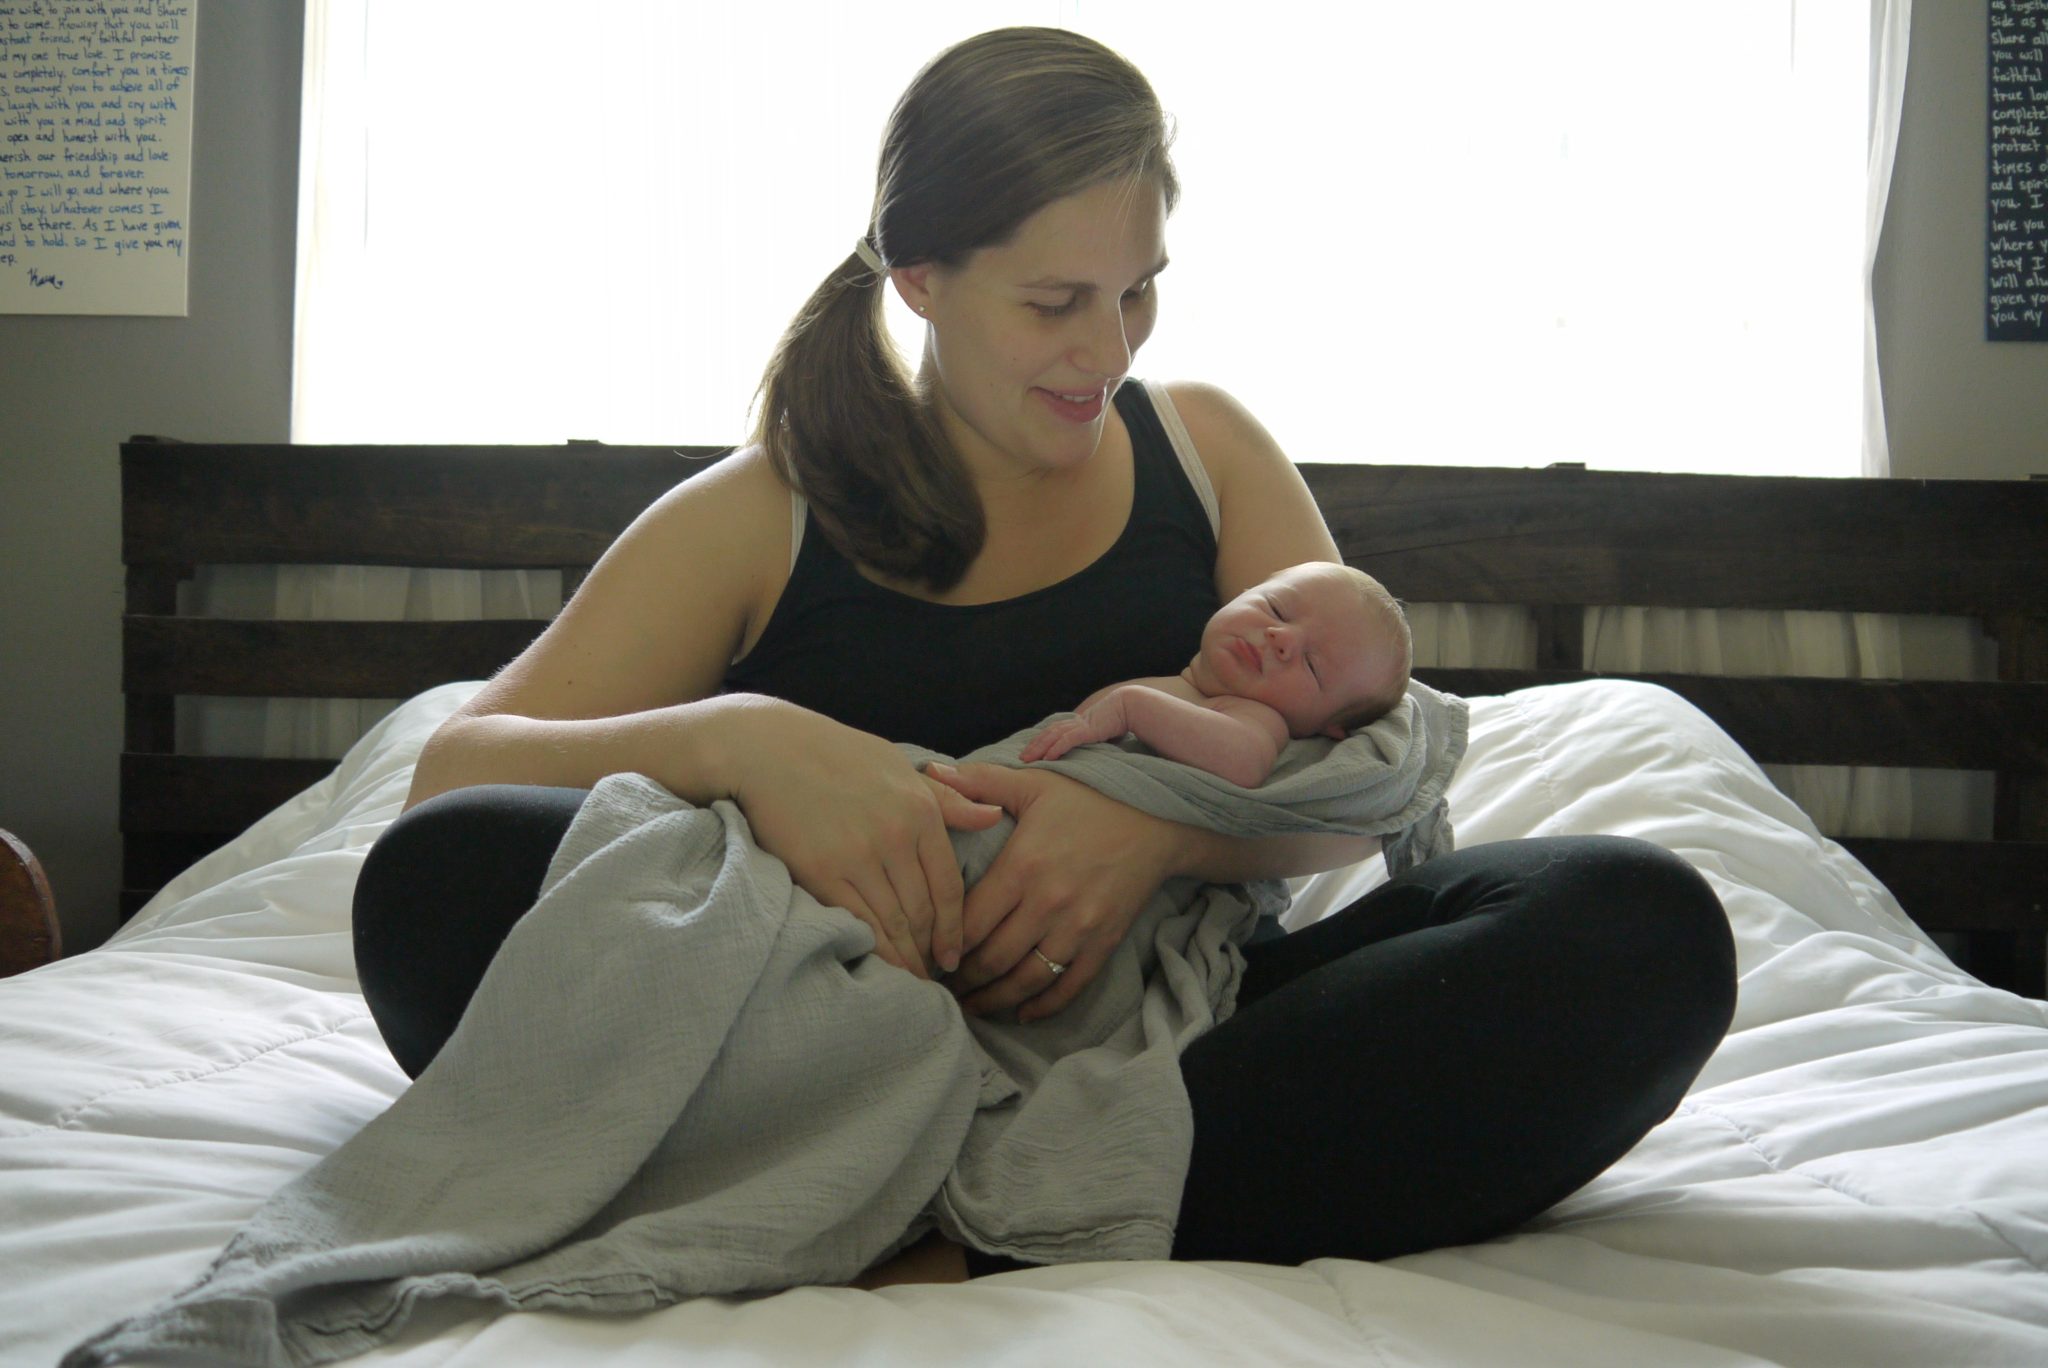 Home Birth, From a Medical Perspective